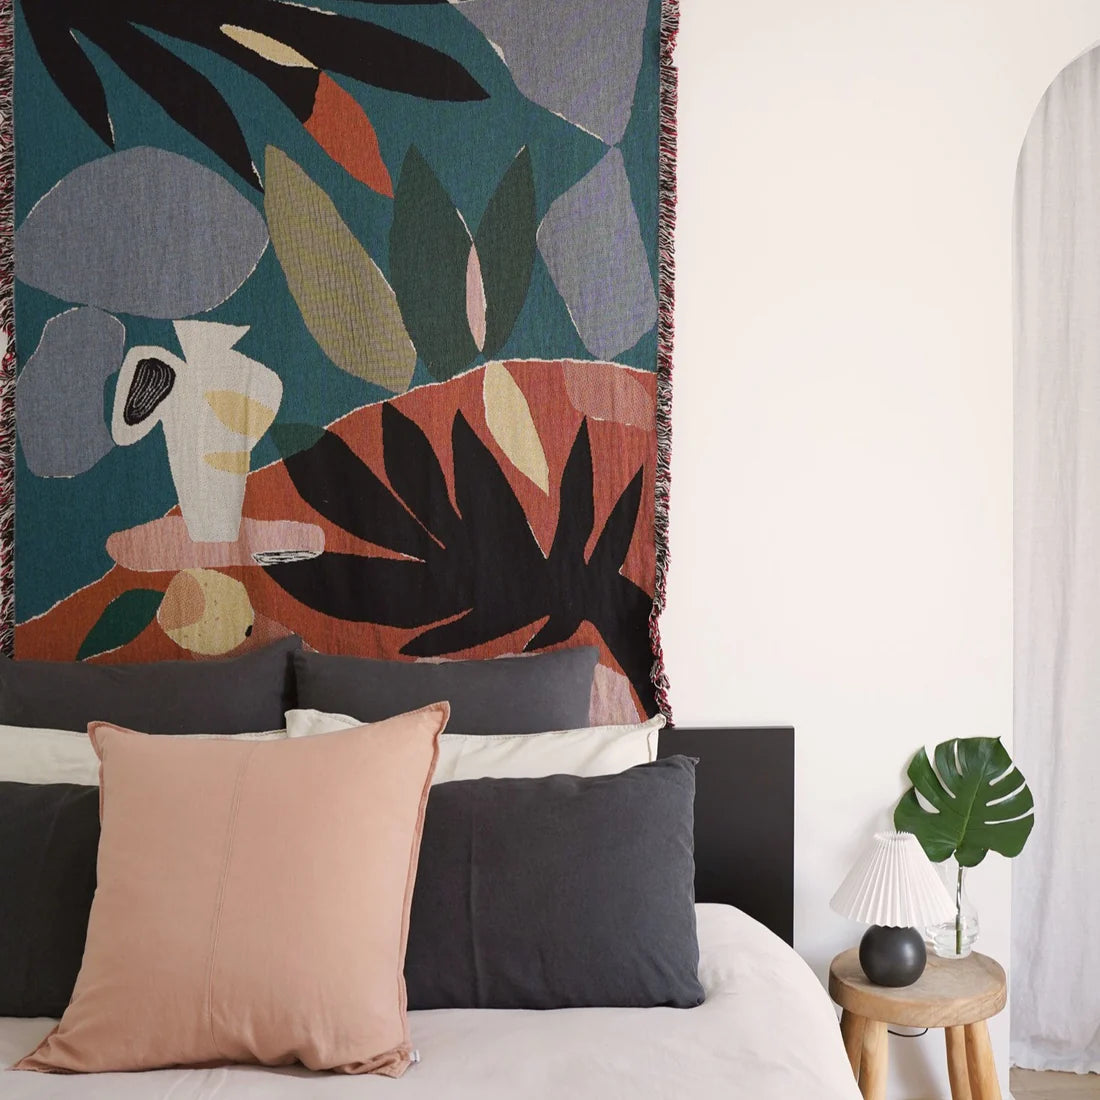 Bedroom scene featuring illustrated throw blanket in orange, greens and black hanging on a wall behind a bed